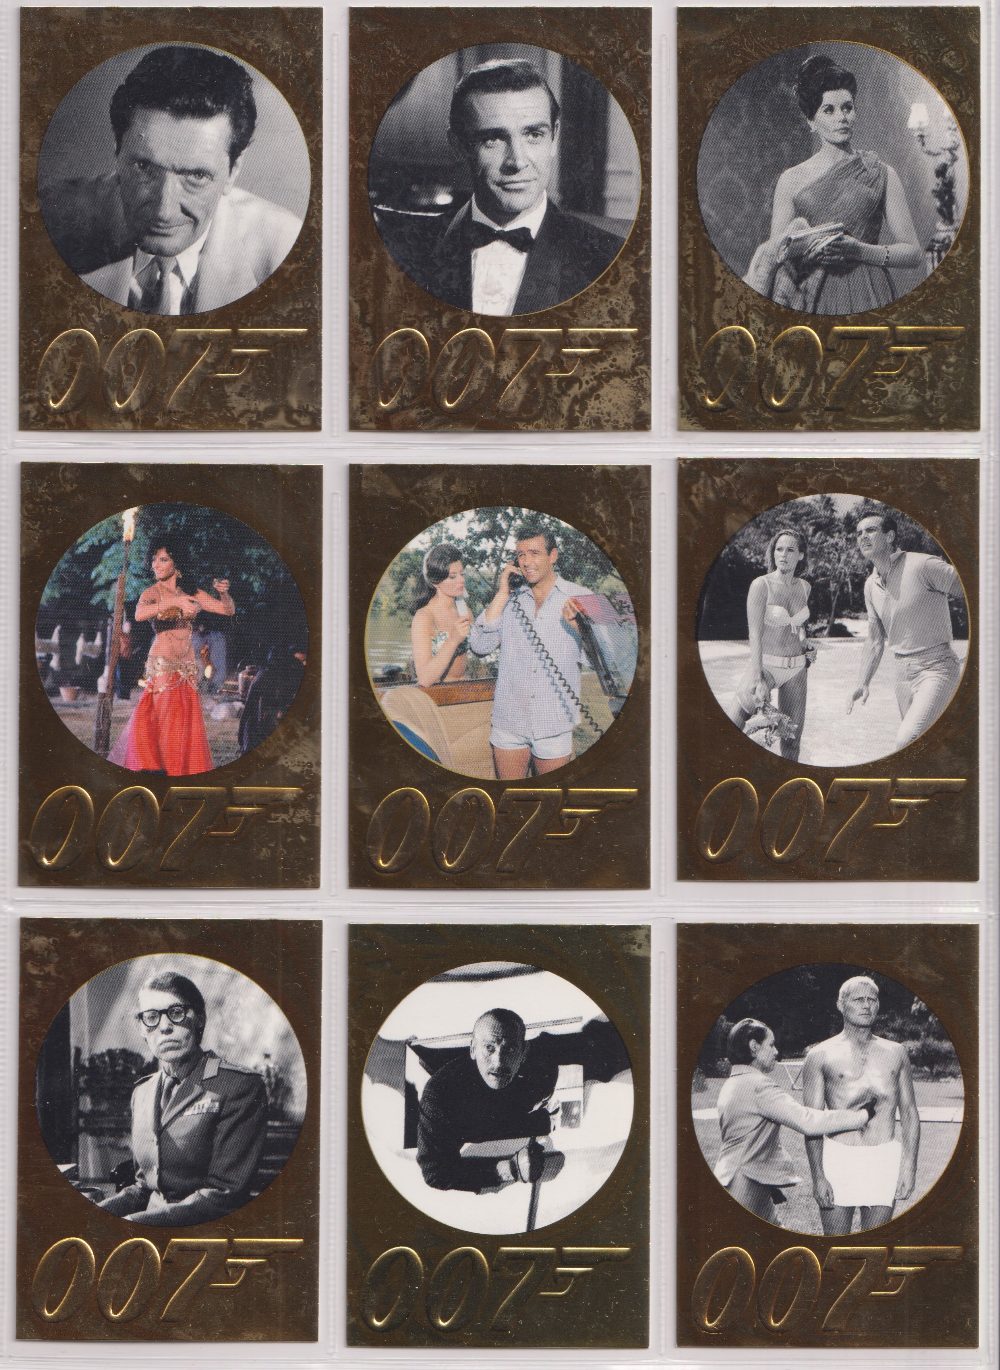 James Bond, 50th Anniversary Trading Cards Gold Cards (set of 198), Skyfall silhouette (4), Gold - Image 37 of 37